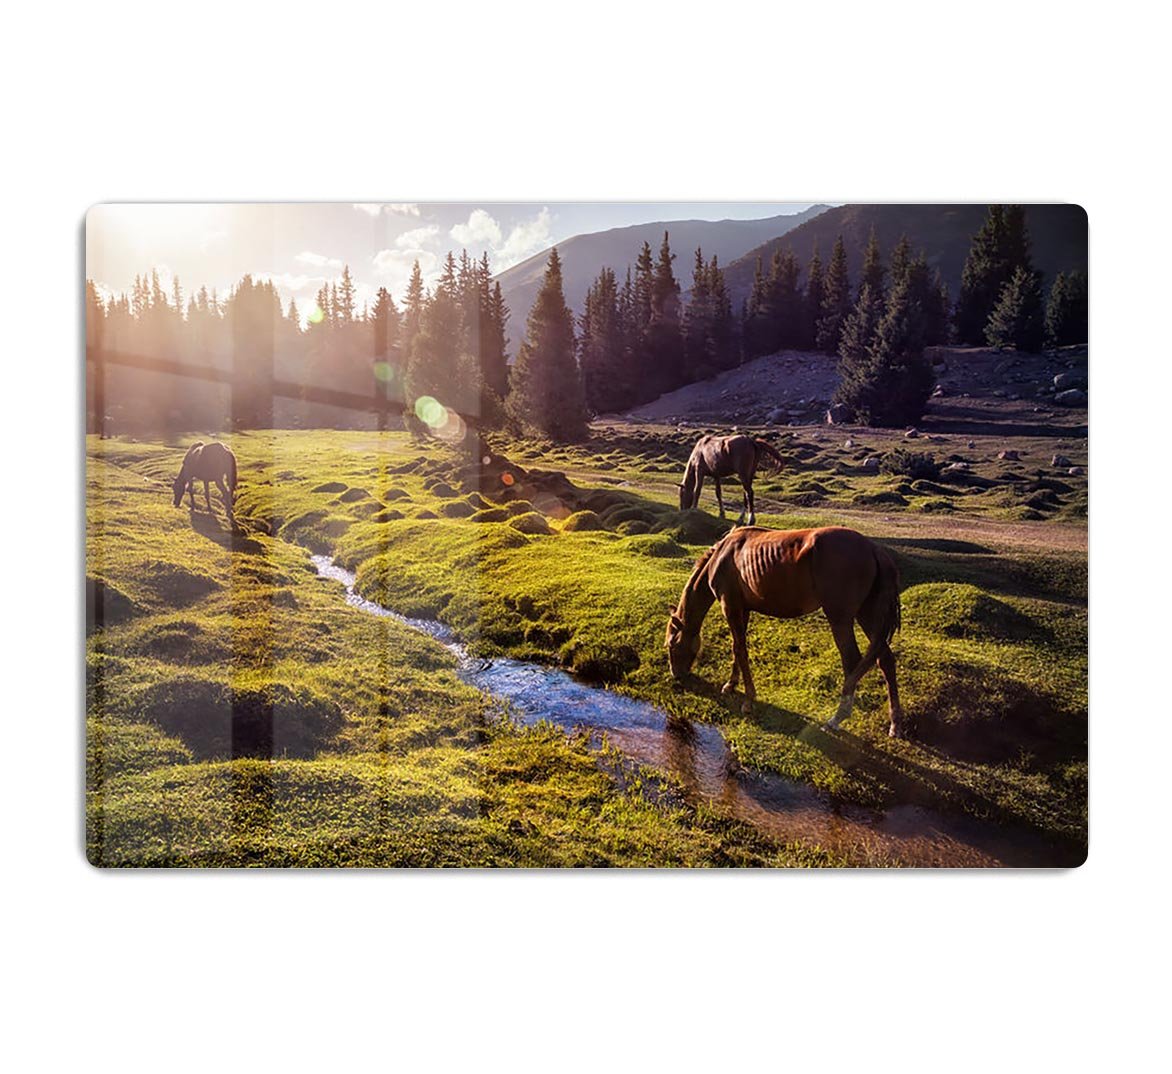 Horses in the Gregory gorge mountains HD Metal Print - Canvas Art Rocks - 1